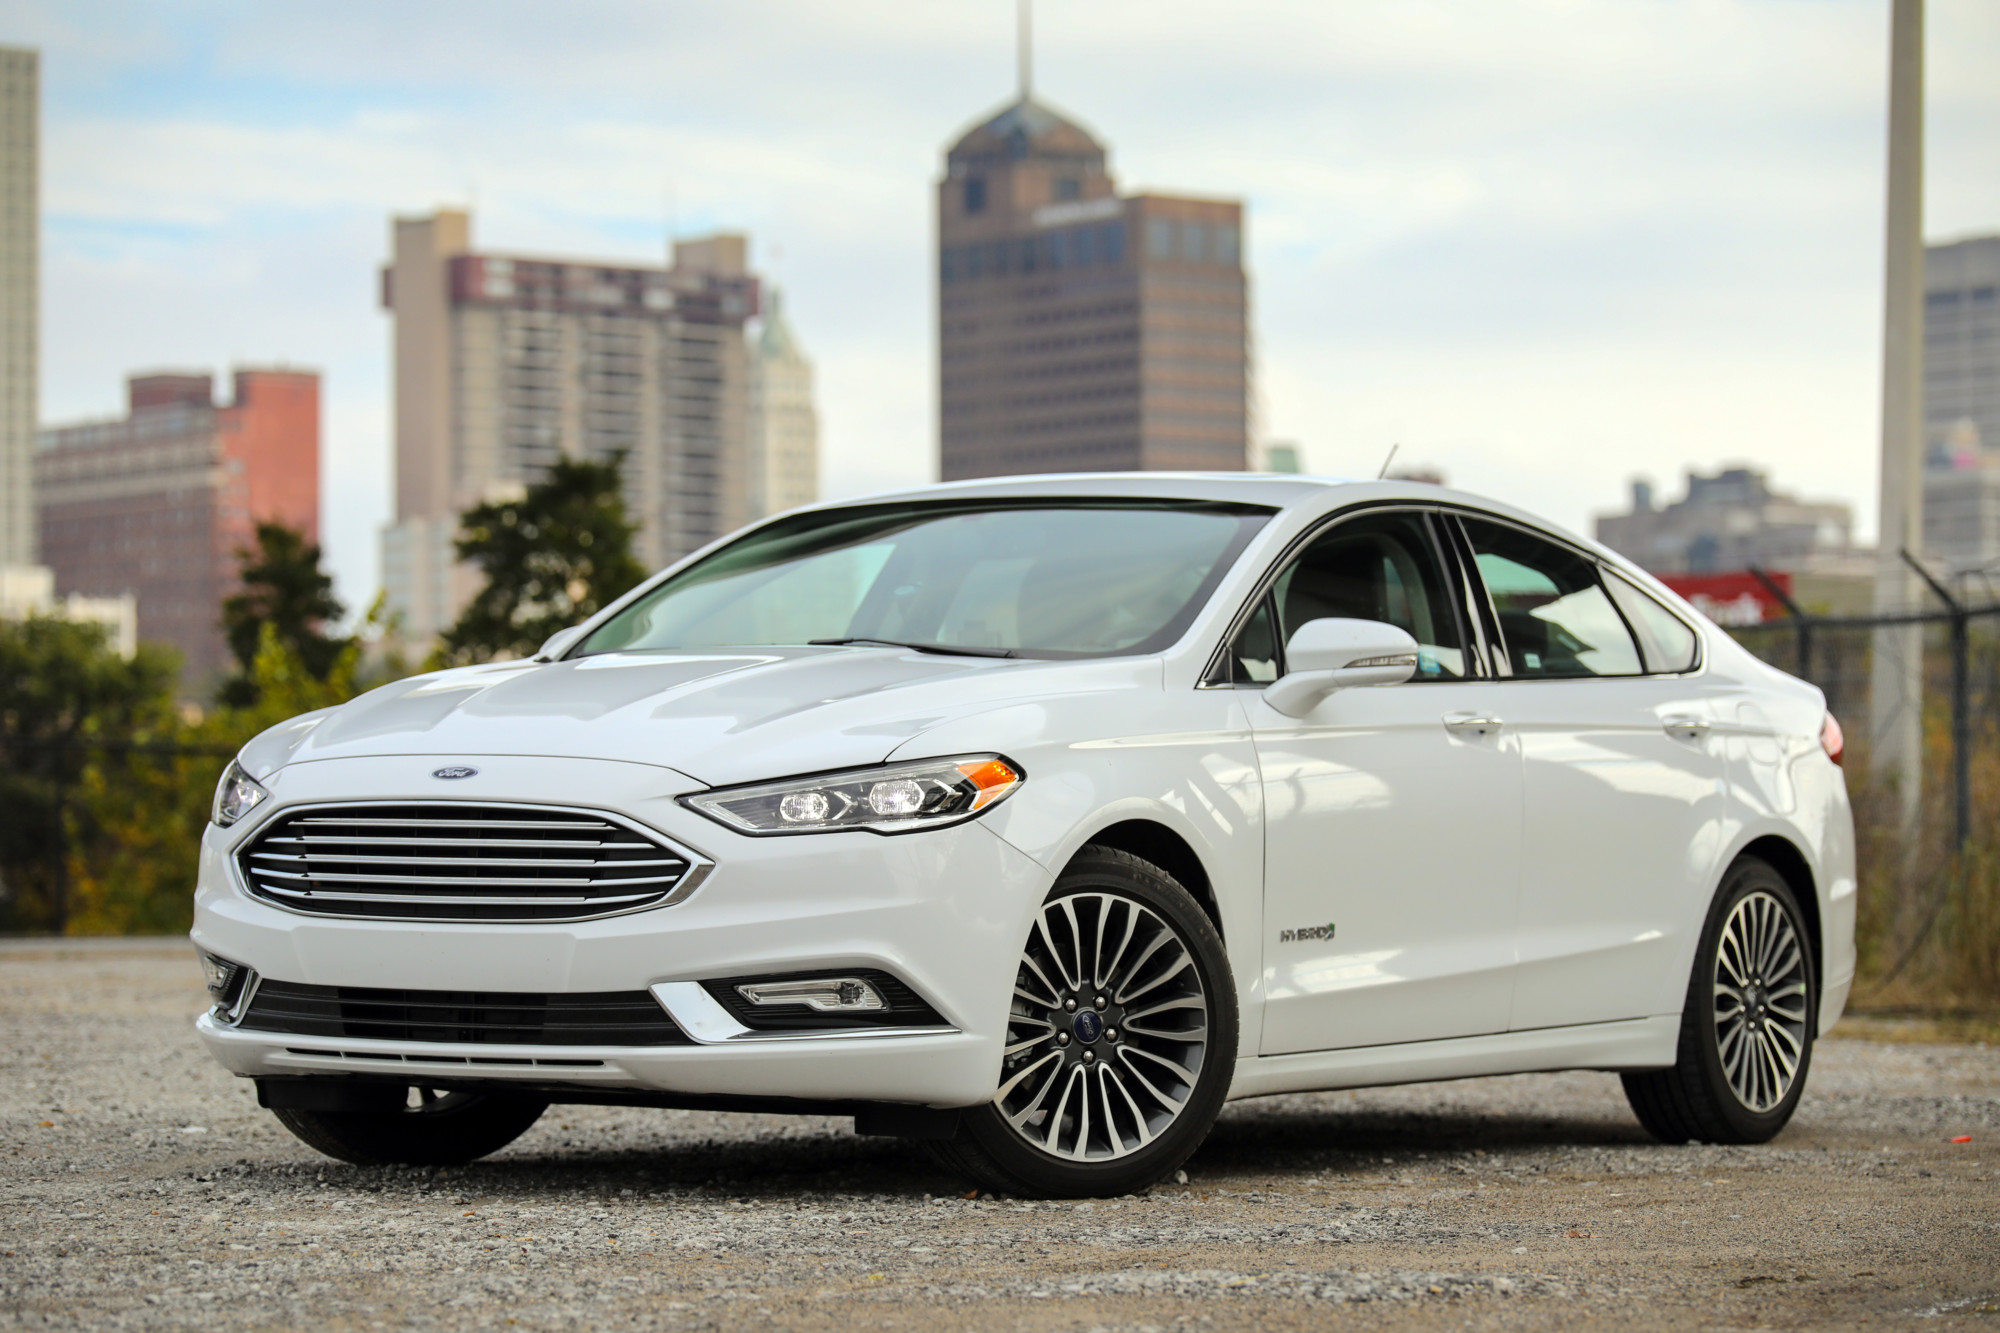 Ford Fusion Hybrid in driveway with city in background